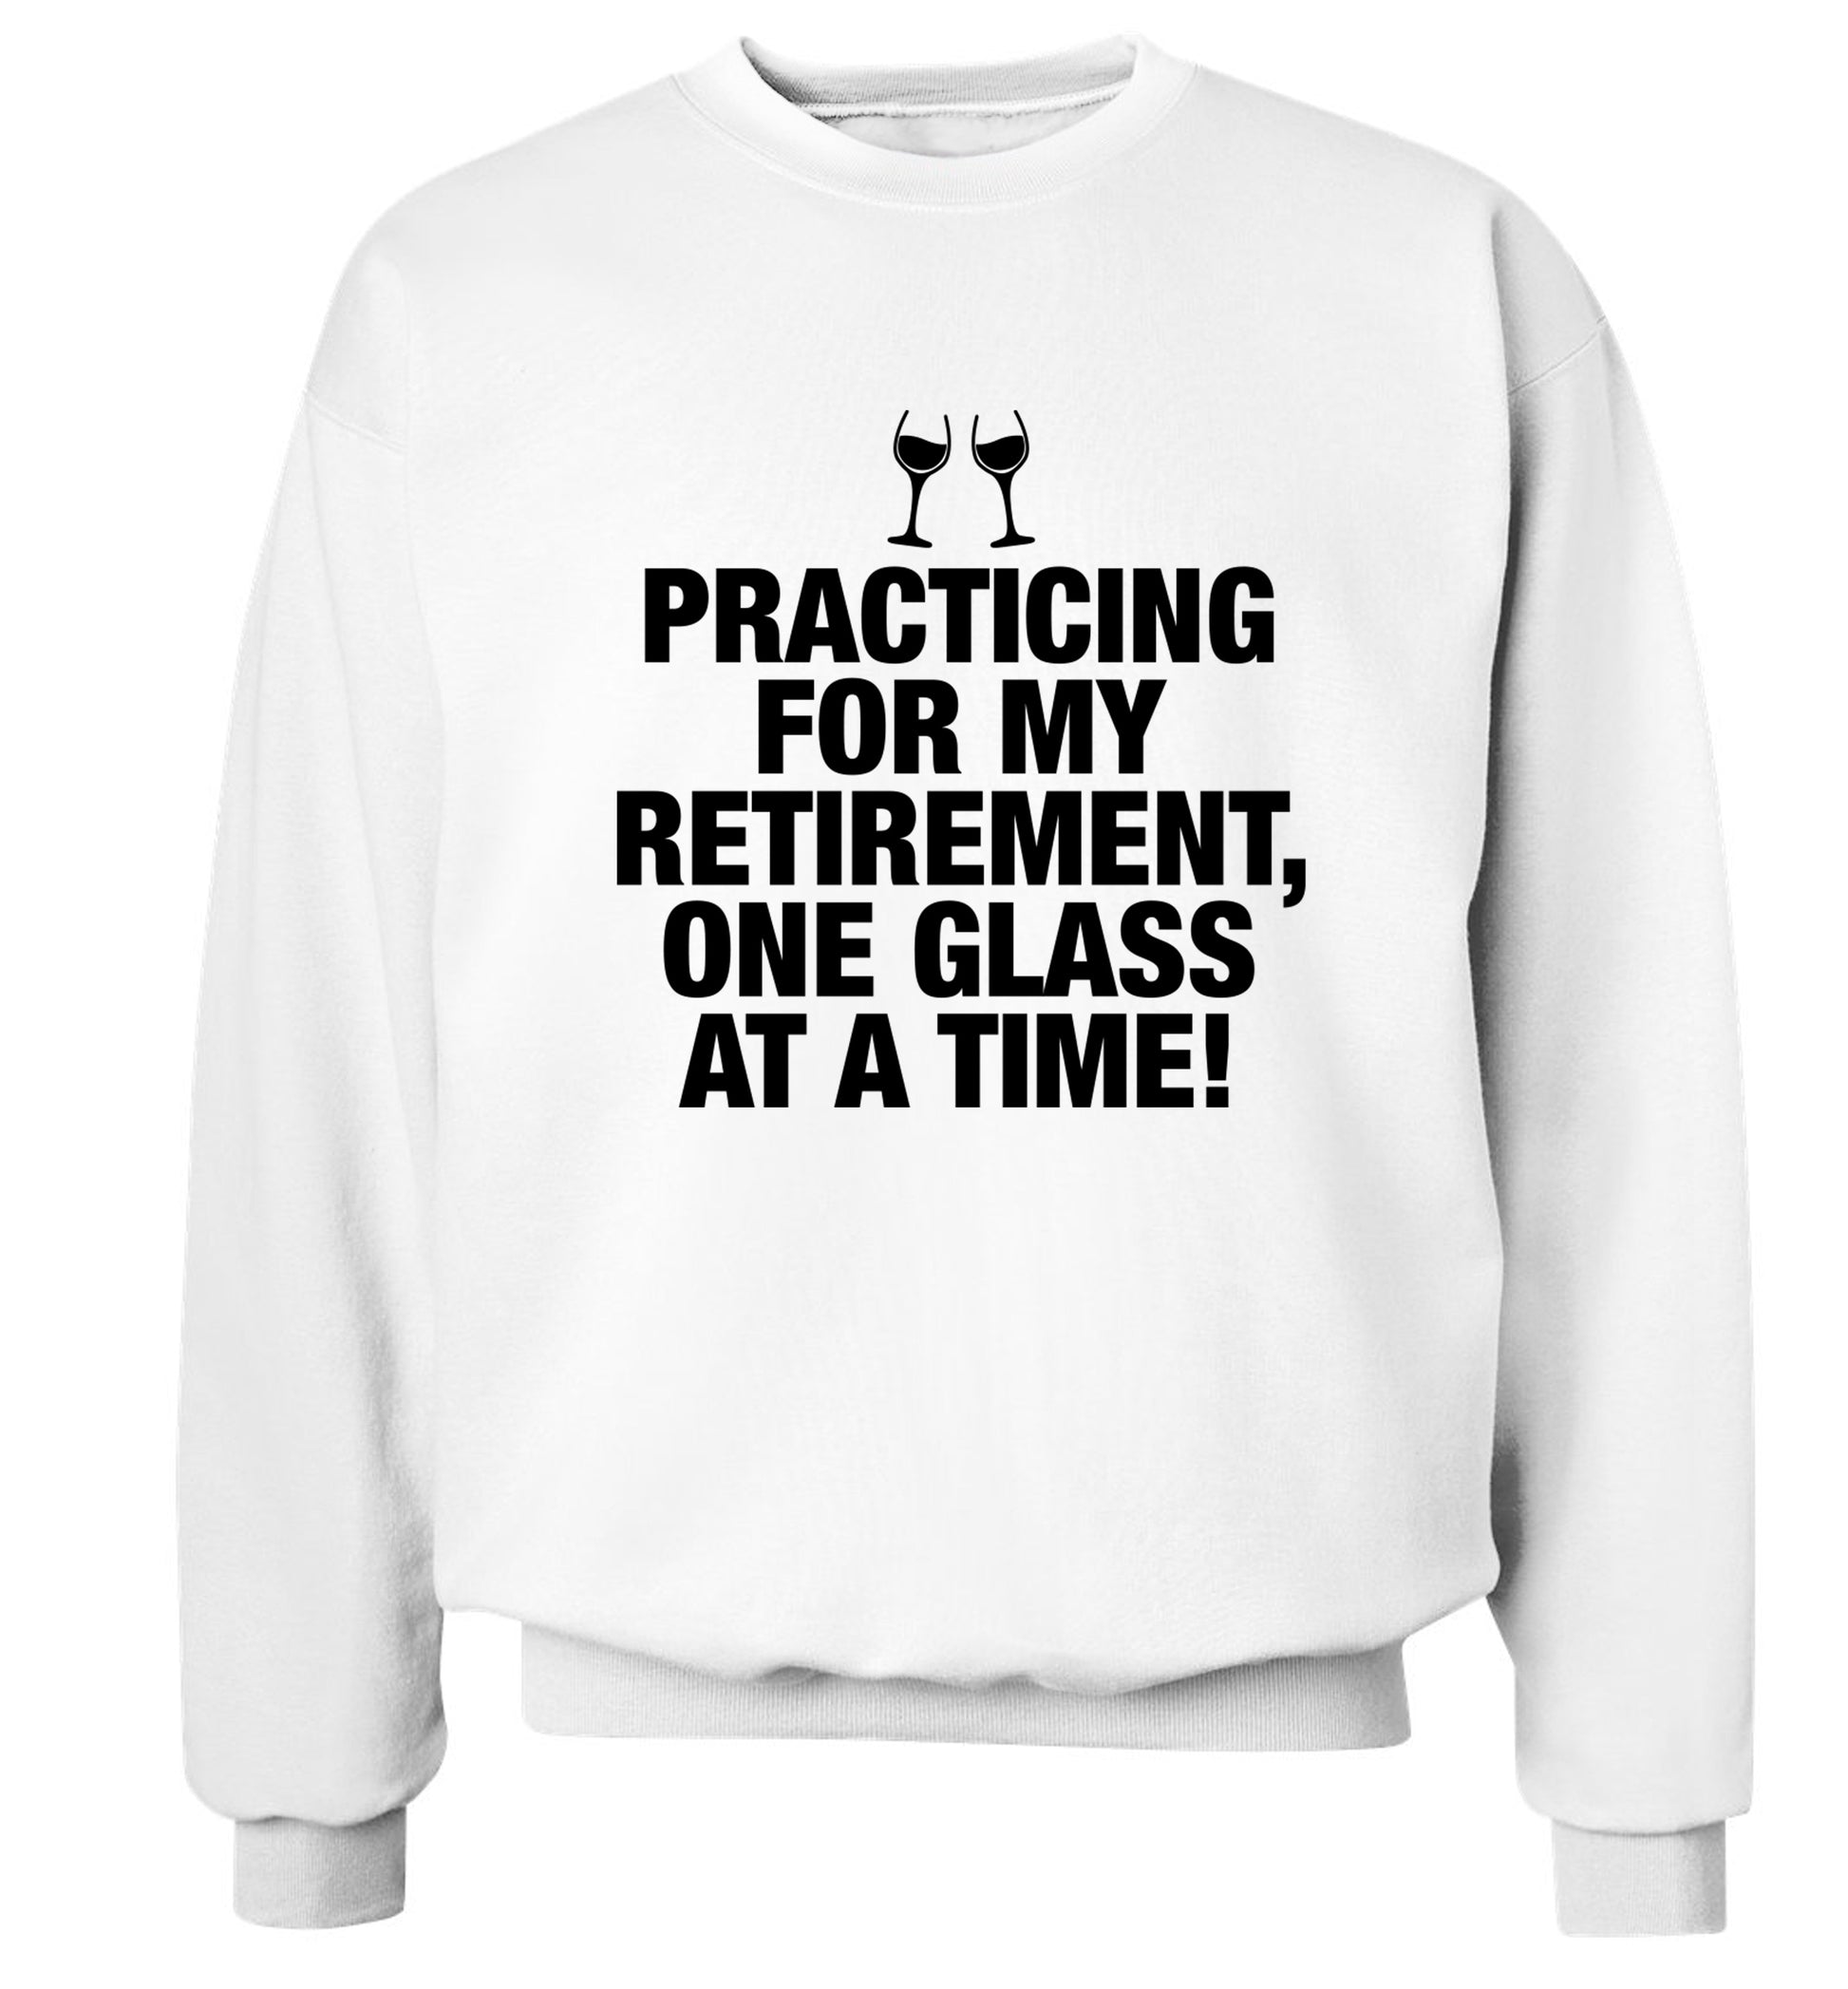 Practicing my retirement one glass at a time Adult's unisex white Sweater 2XL